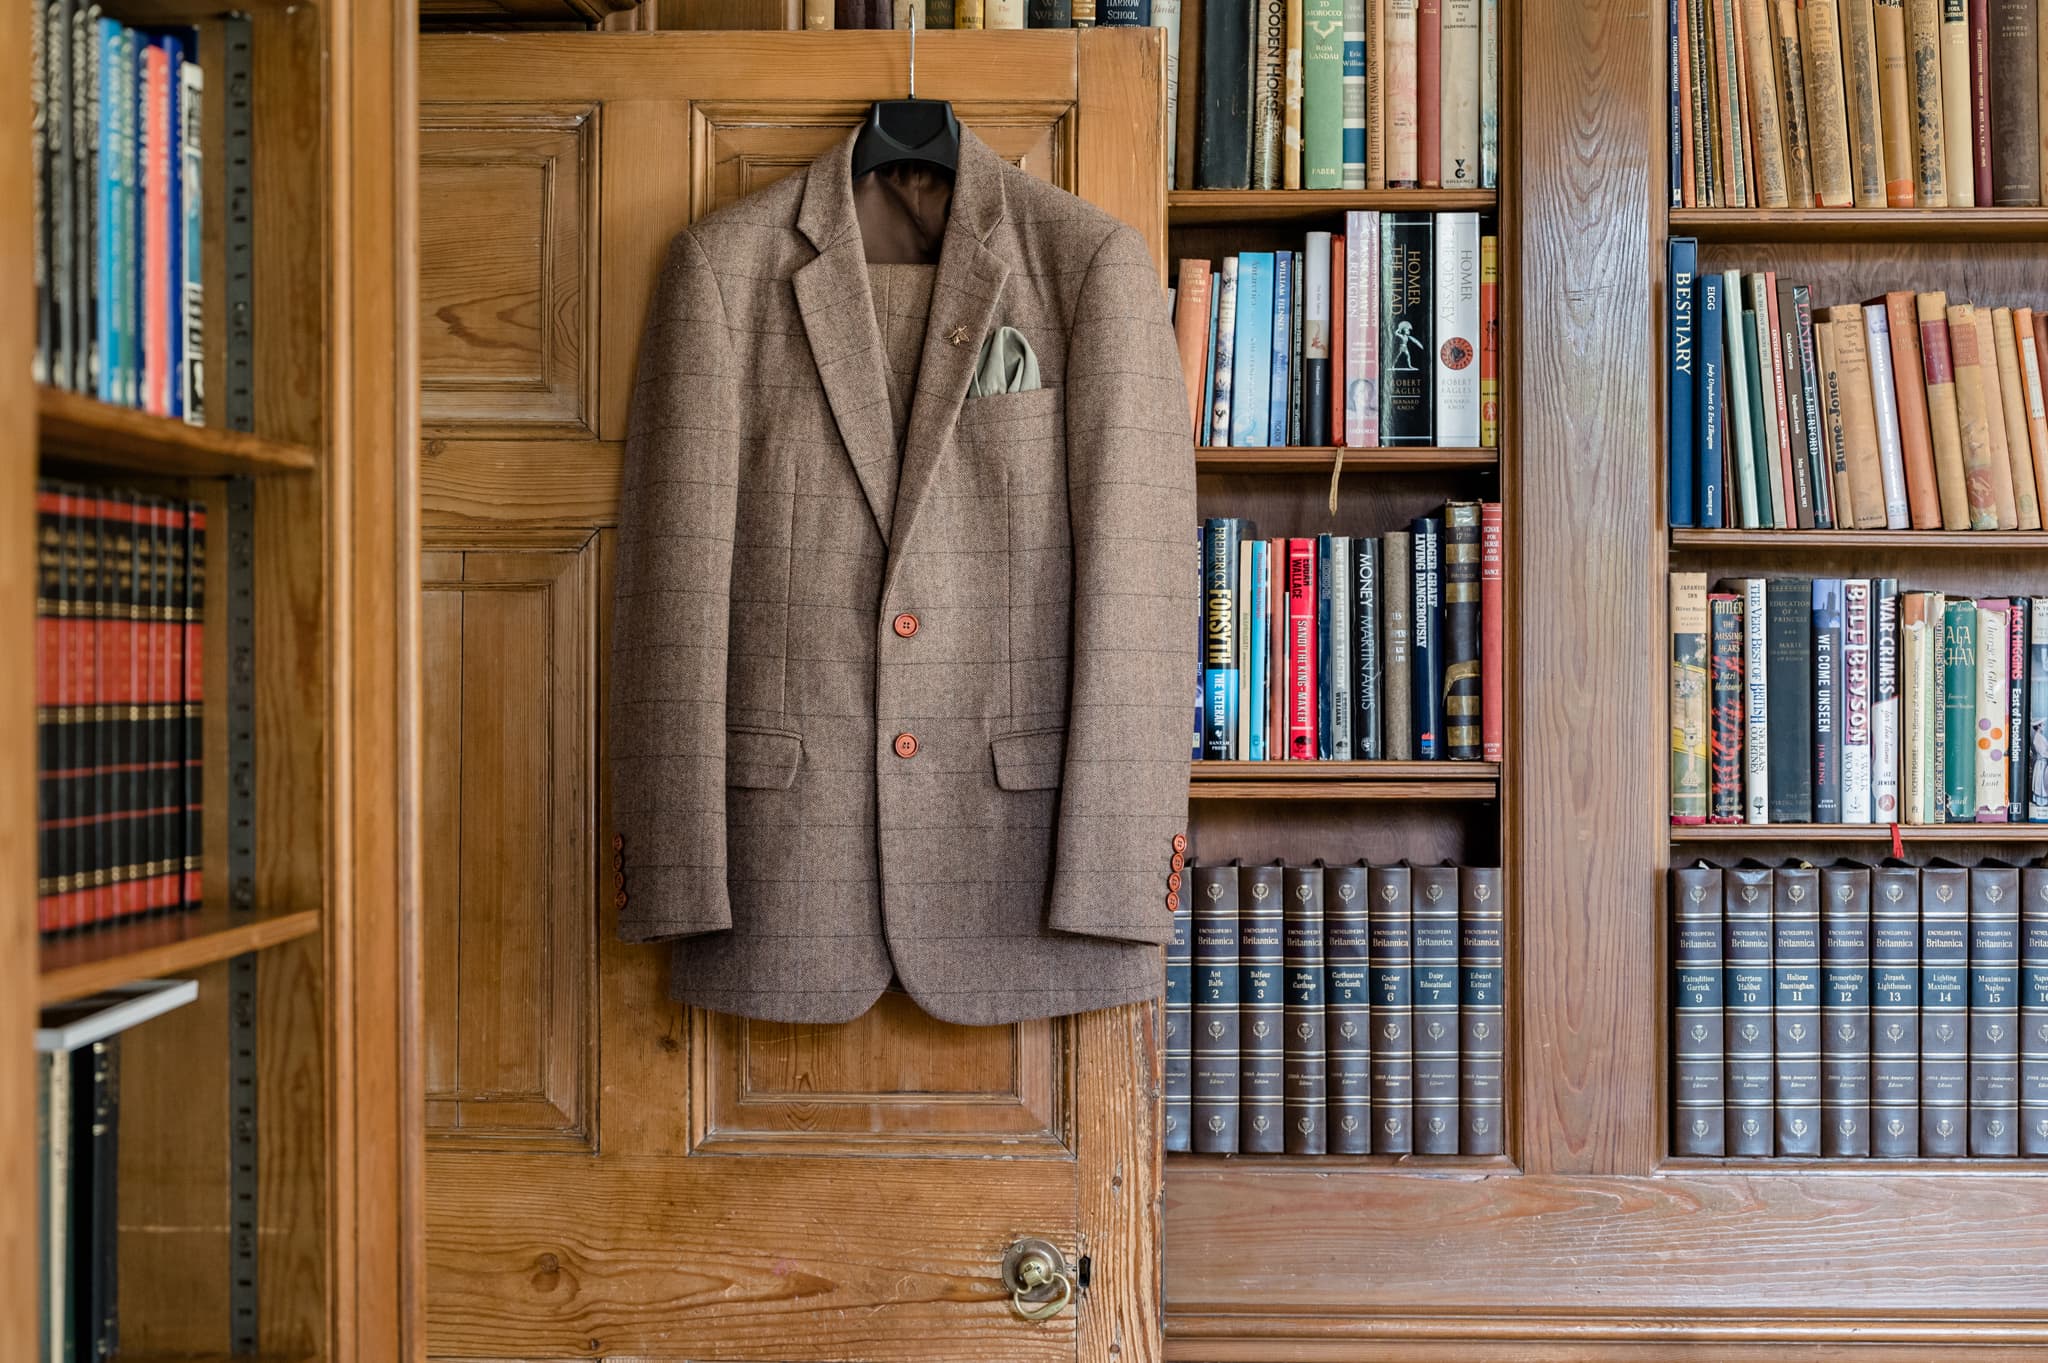 Groom's suit jacket hanging on the library door at Sutton Bonington Hall